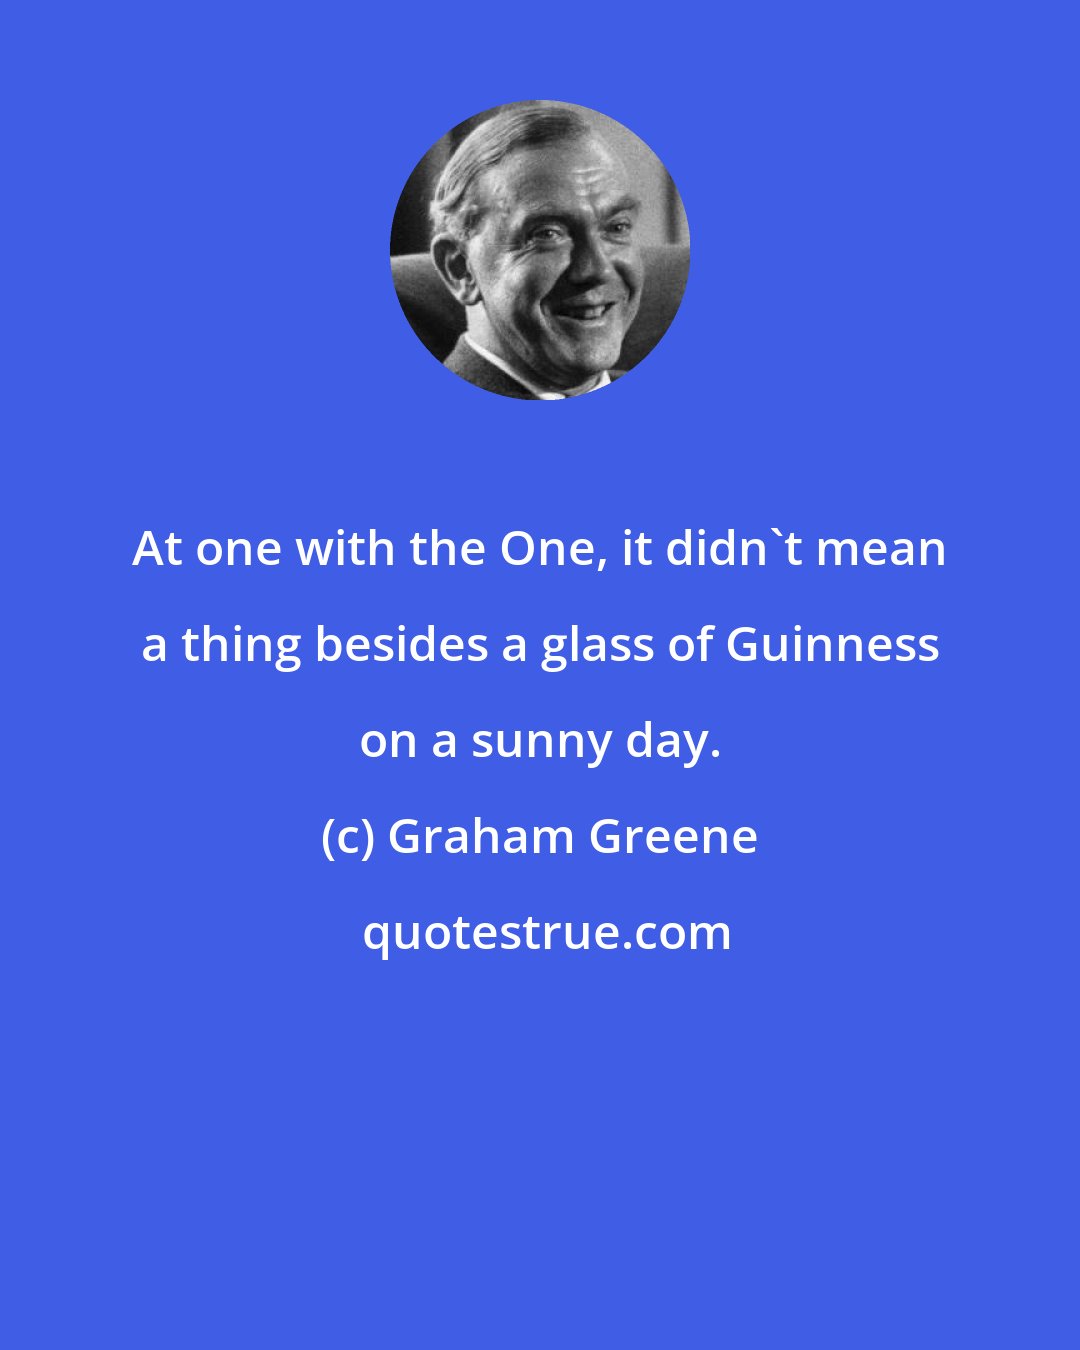 Graham Greene: At one with the One, it didn't mean a thing besides a glass of Guinness on a sunny day.